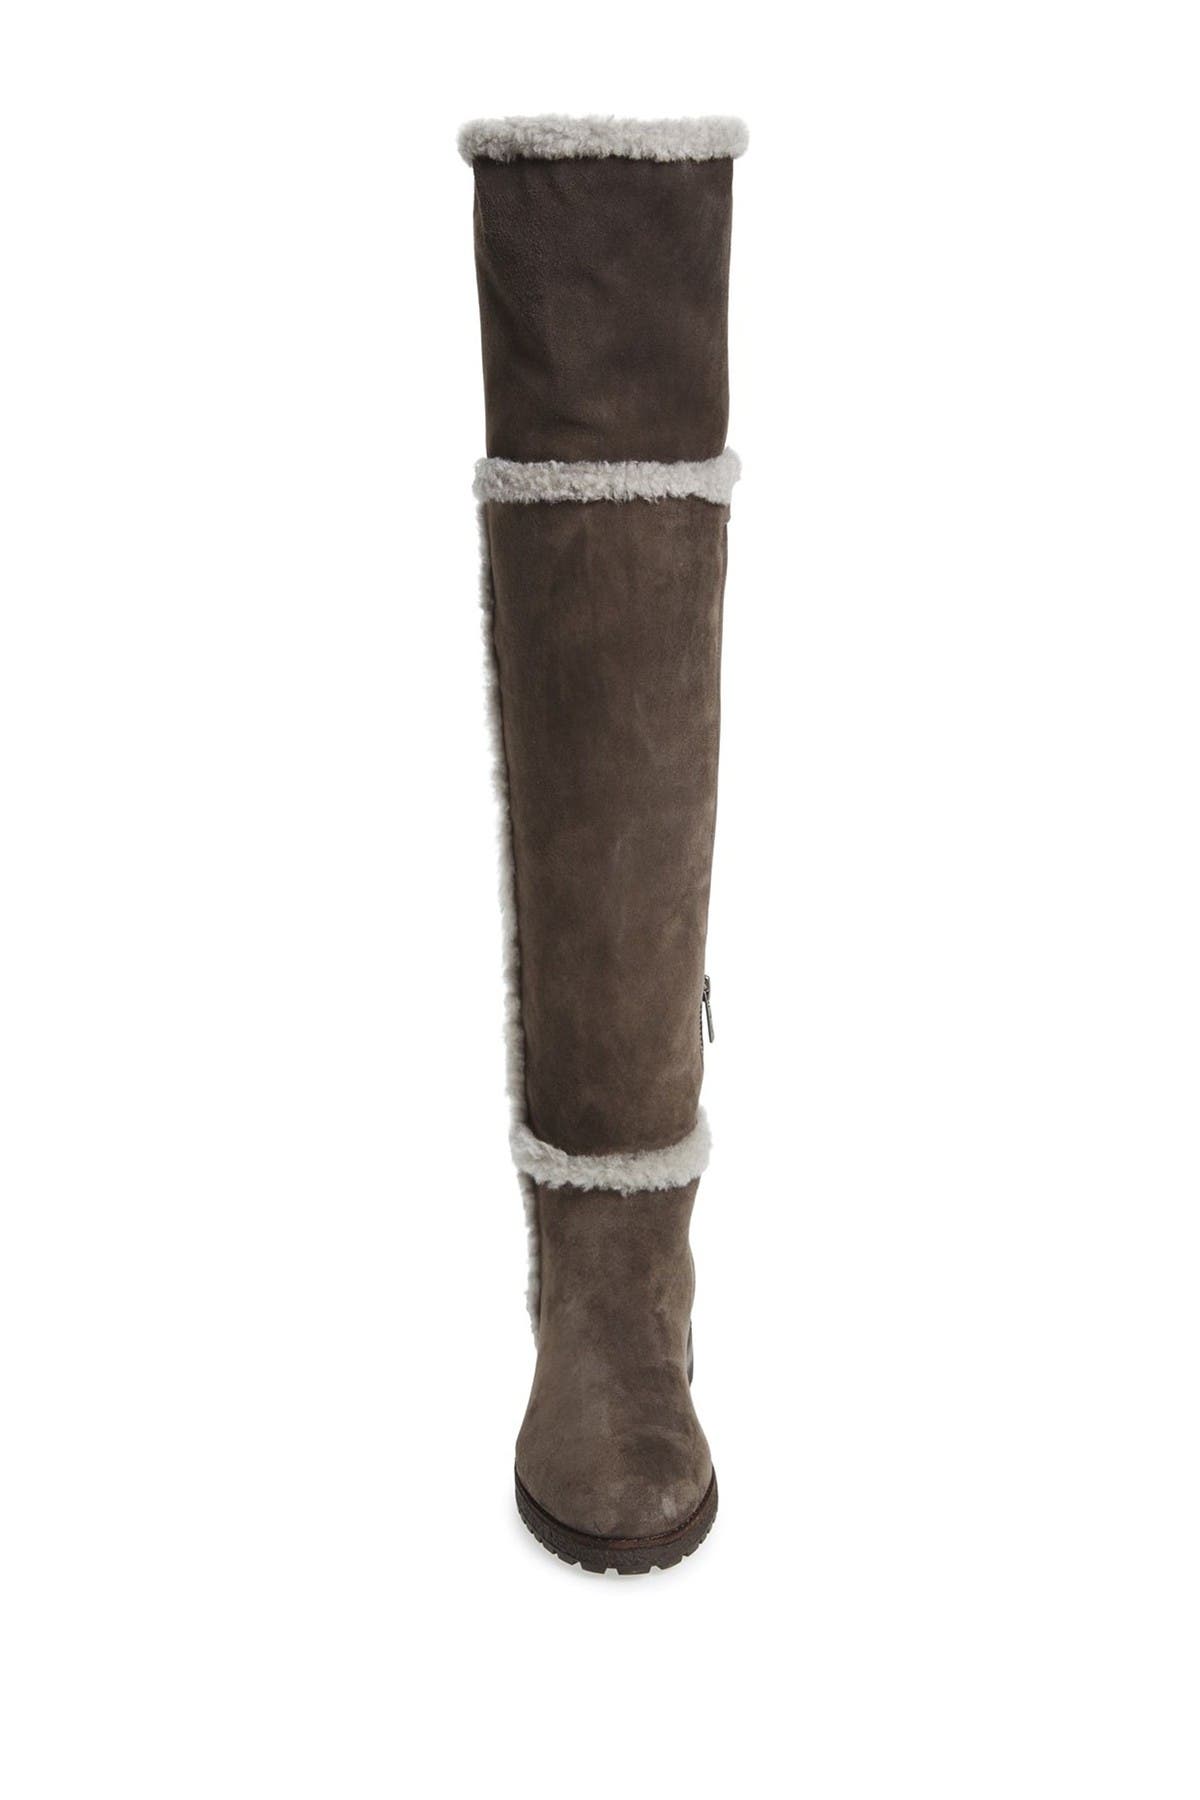 frye tamara shearling over the knee boots